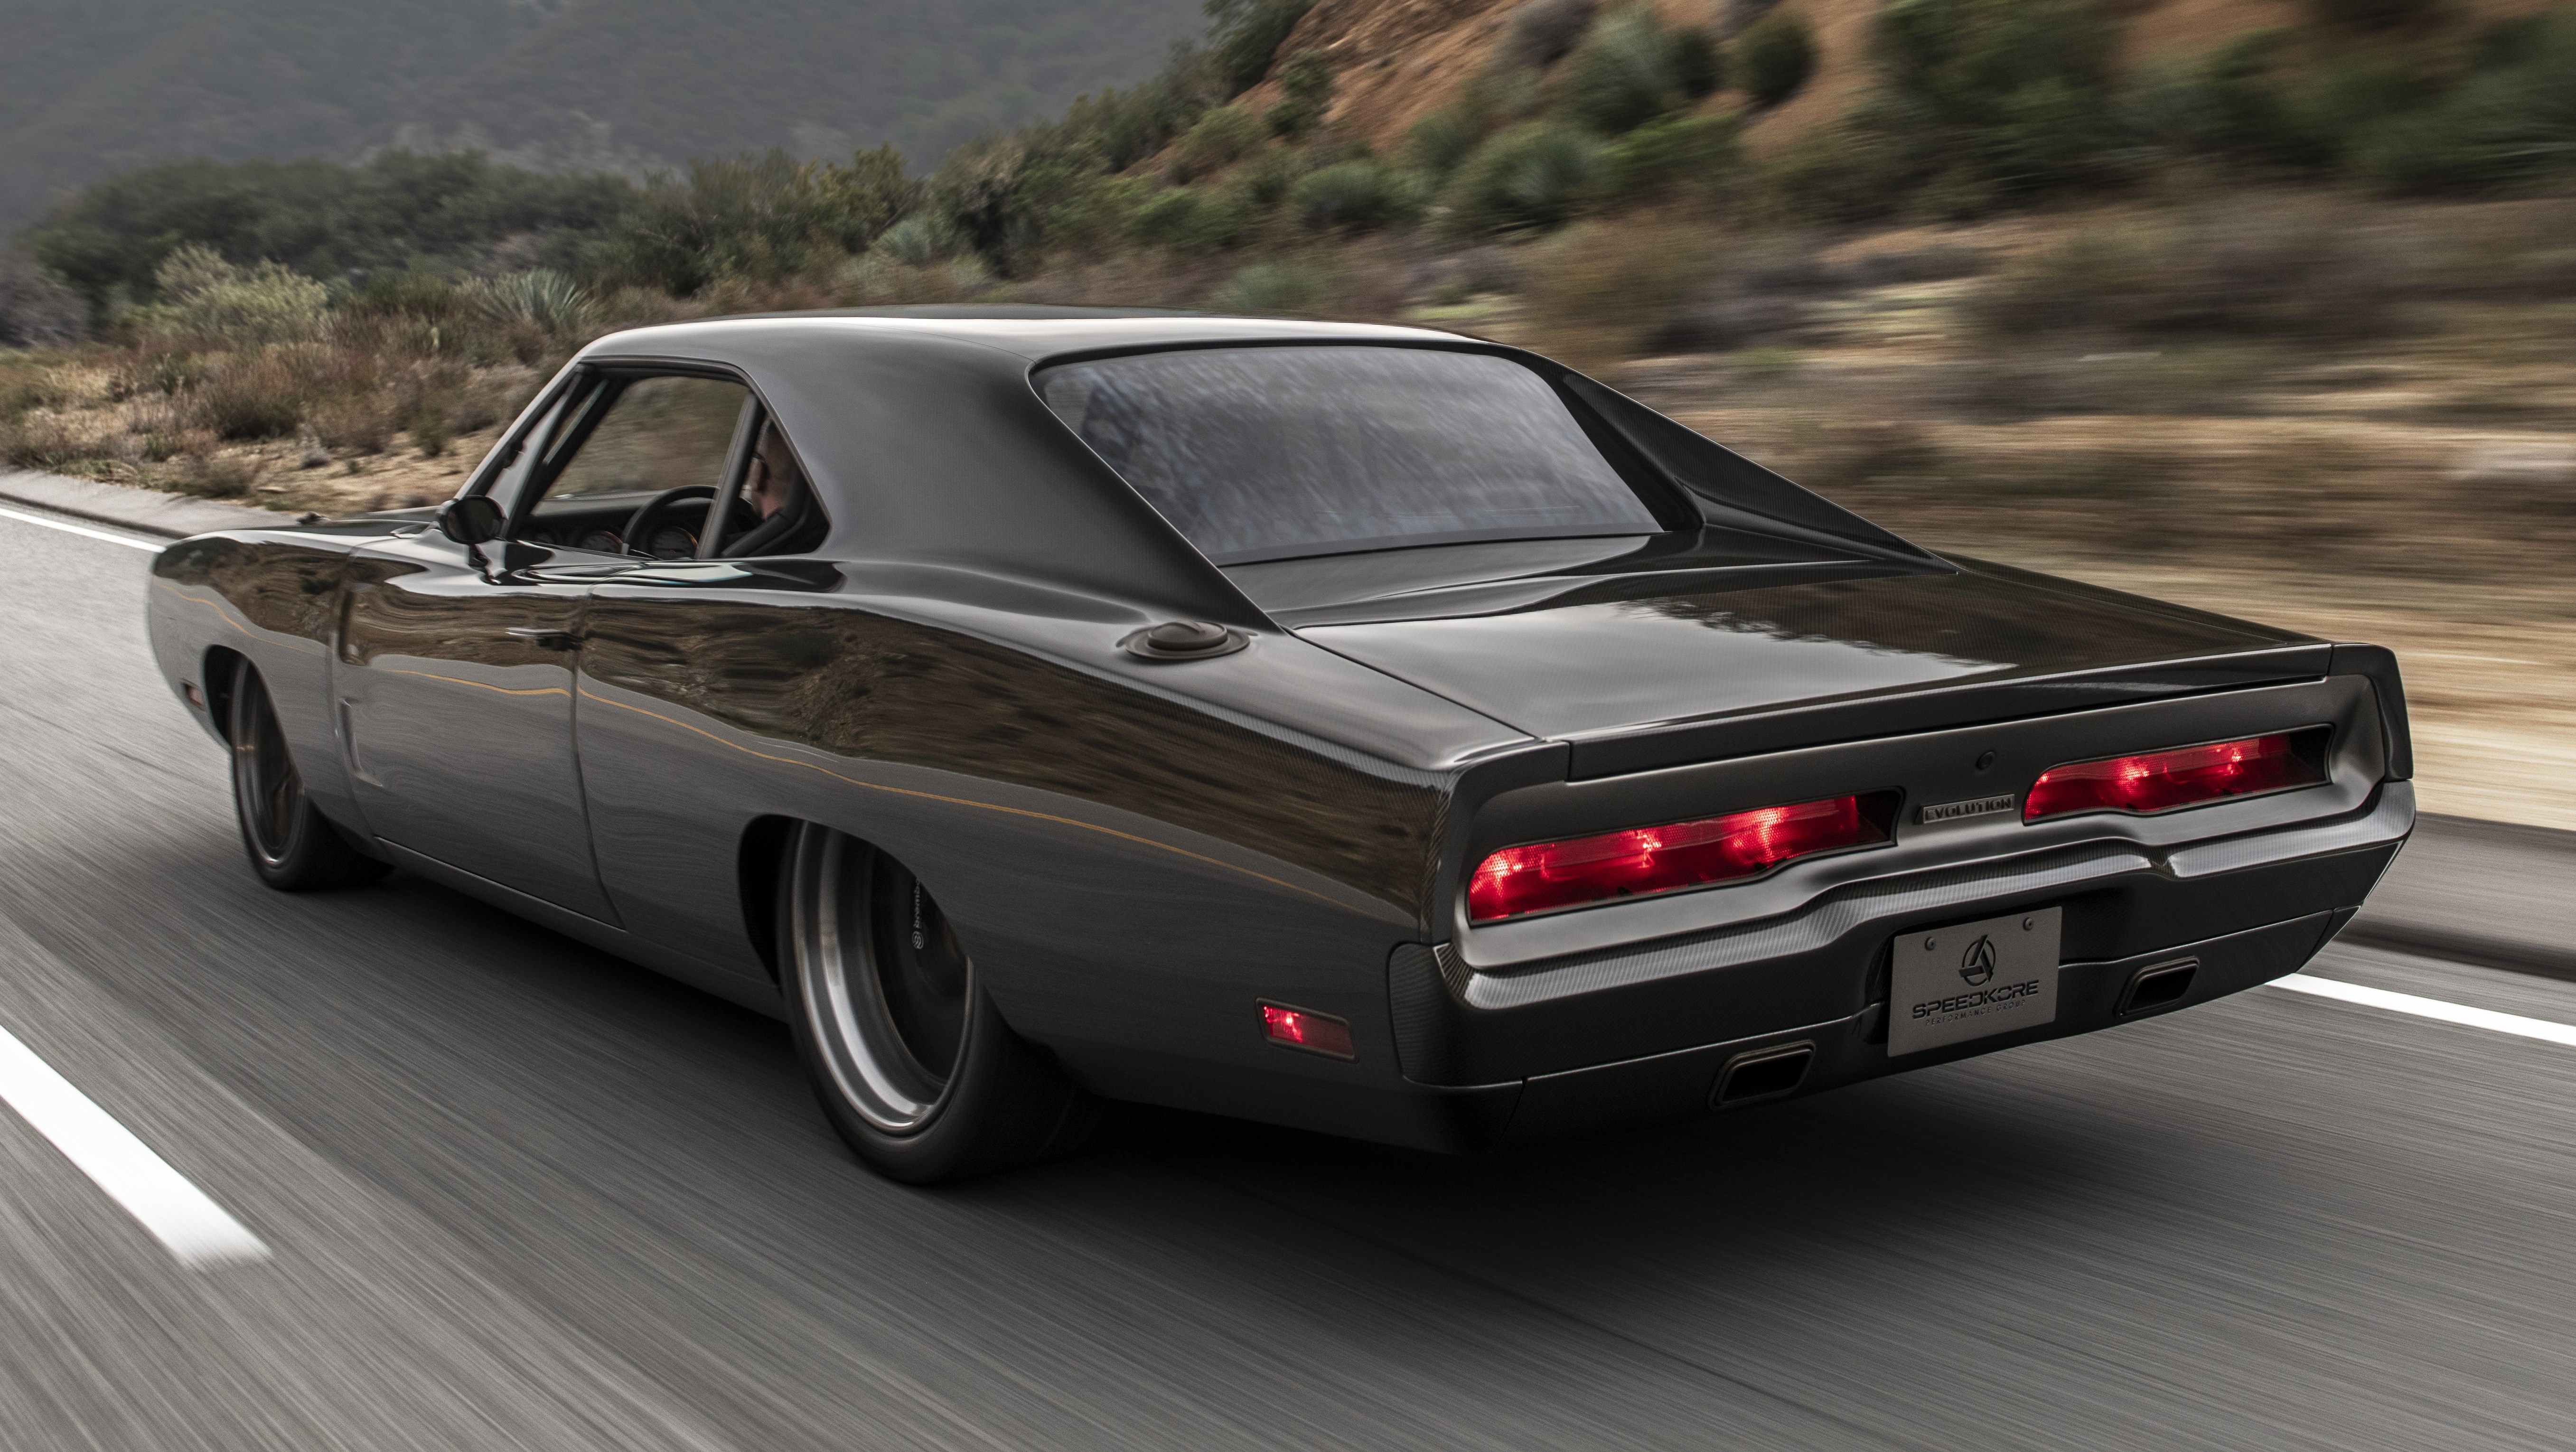 Dodge Charger 1970 4K Wallpaper / Dodge Charger 1970 Wallpapers